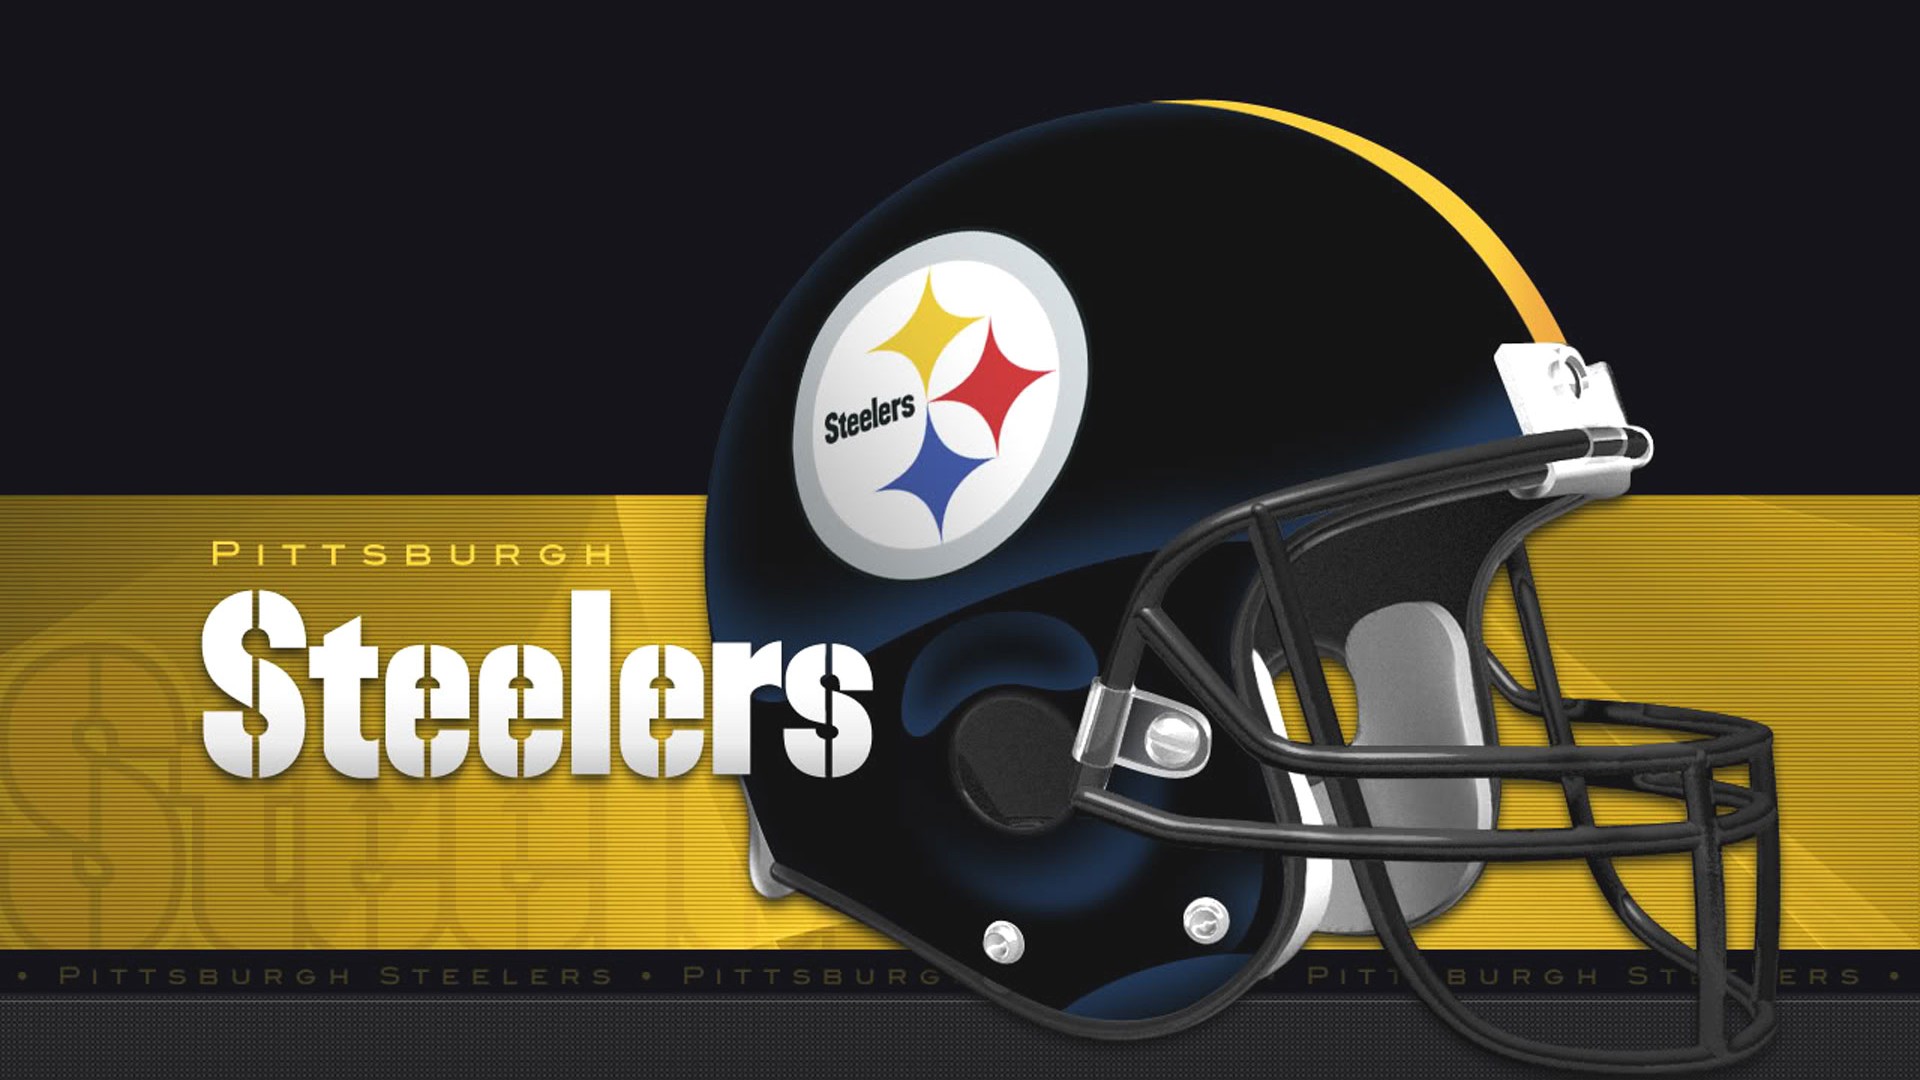 Pittsburgh Steelers Wallpaper For Mac Backgrounds With Resolution 1920X1080 pixel. You can make this wallpaper for your Mac or Windows Desktop Background, iPhone, Android or Tablet and another Smartphone device for free